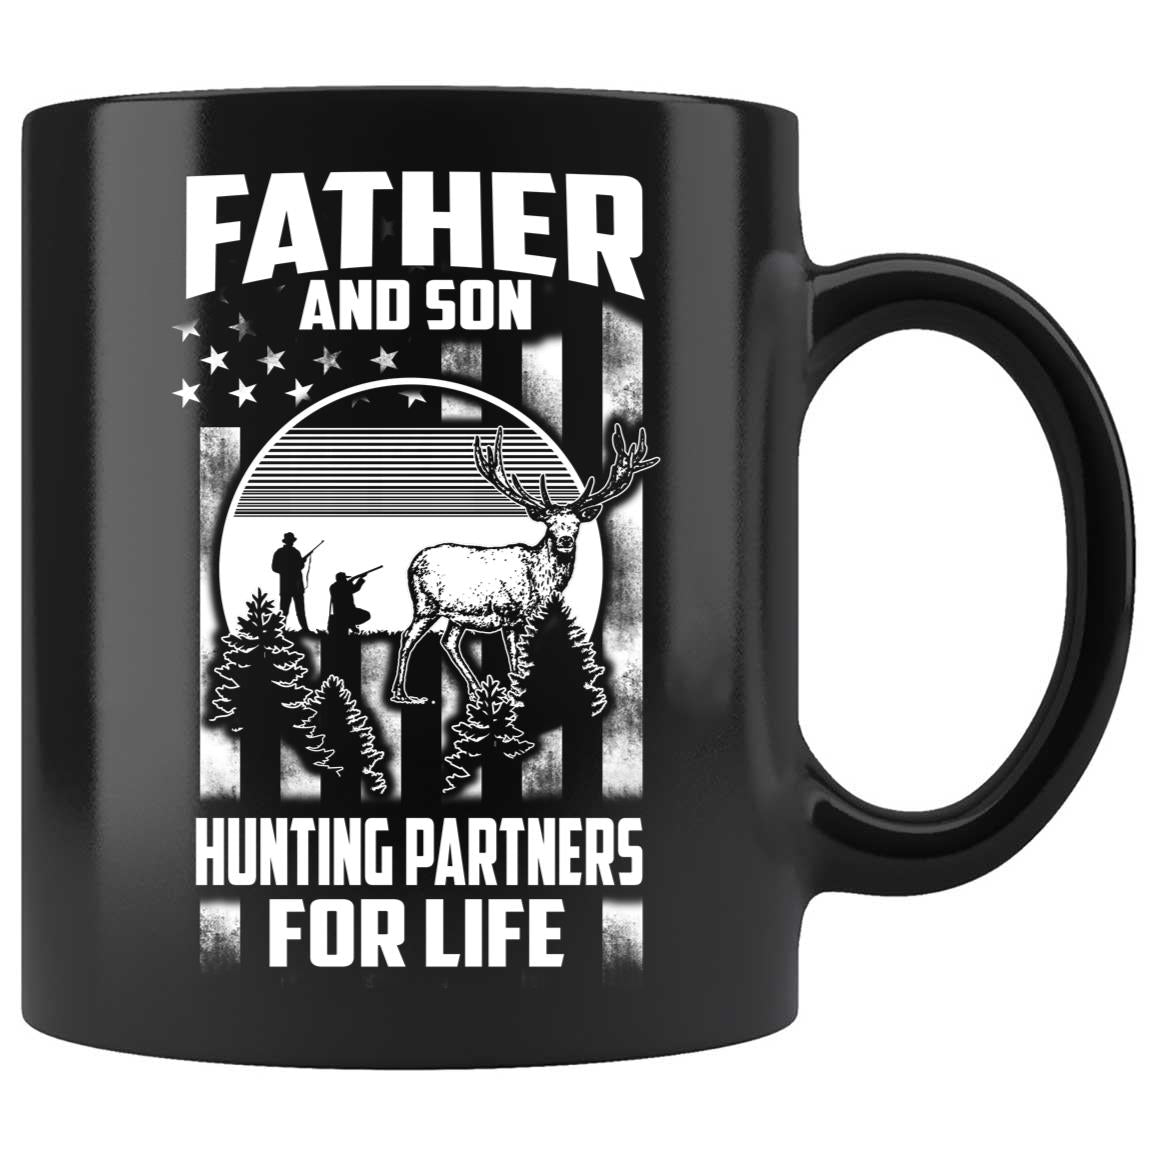 Skitongifts Coffee Mug Funny Ceramic Novelty M71-NH111221-Father And Son Hunting Partners For Life Y5Ipmtf